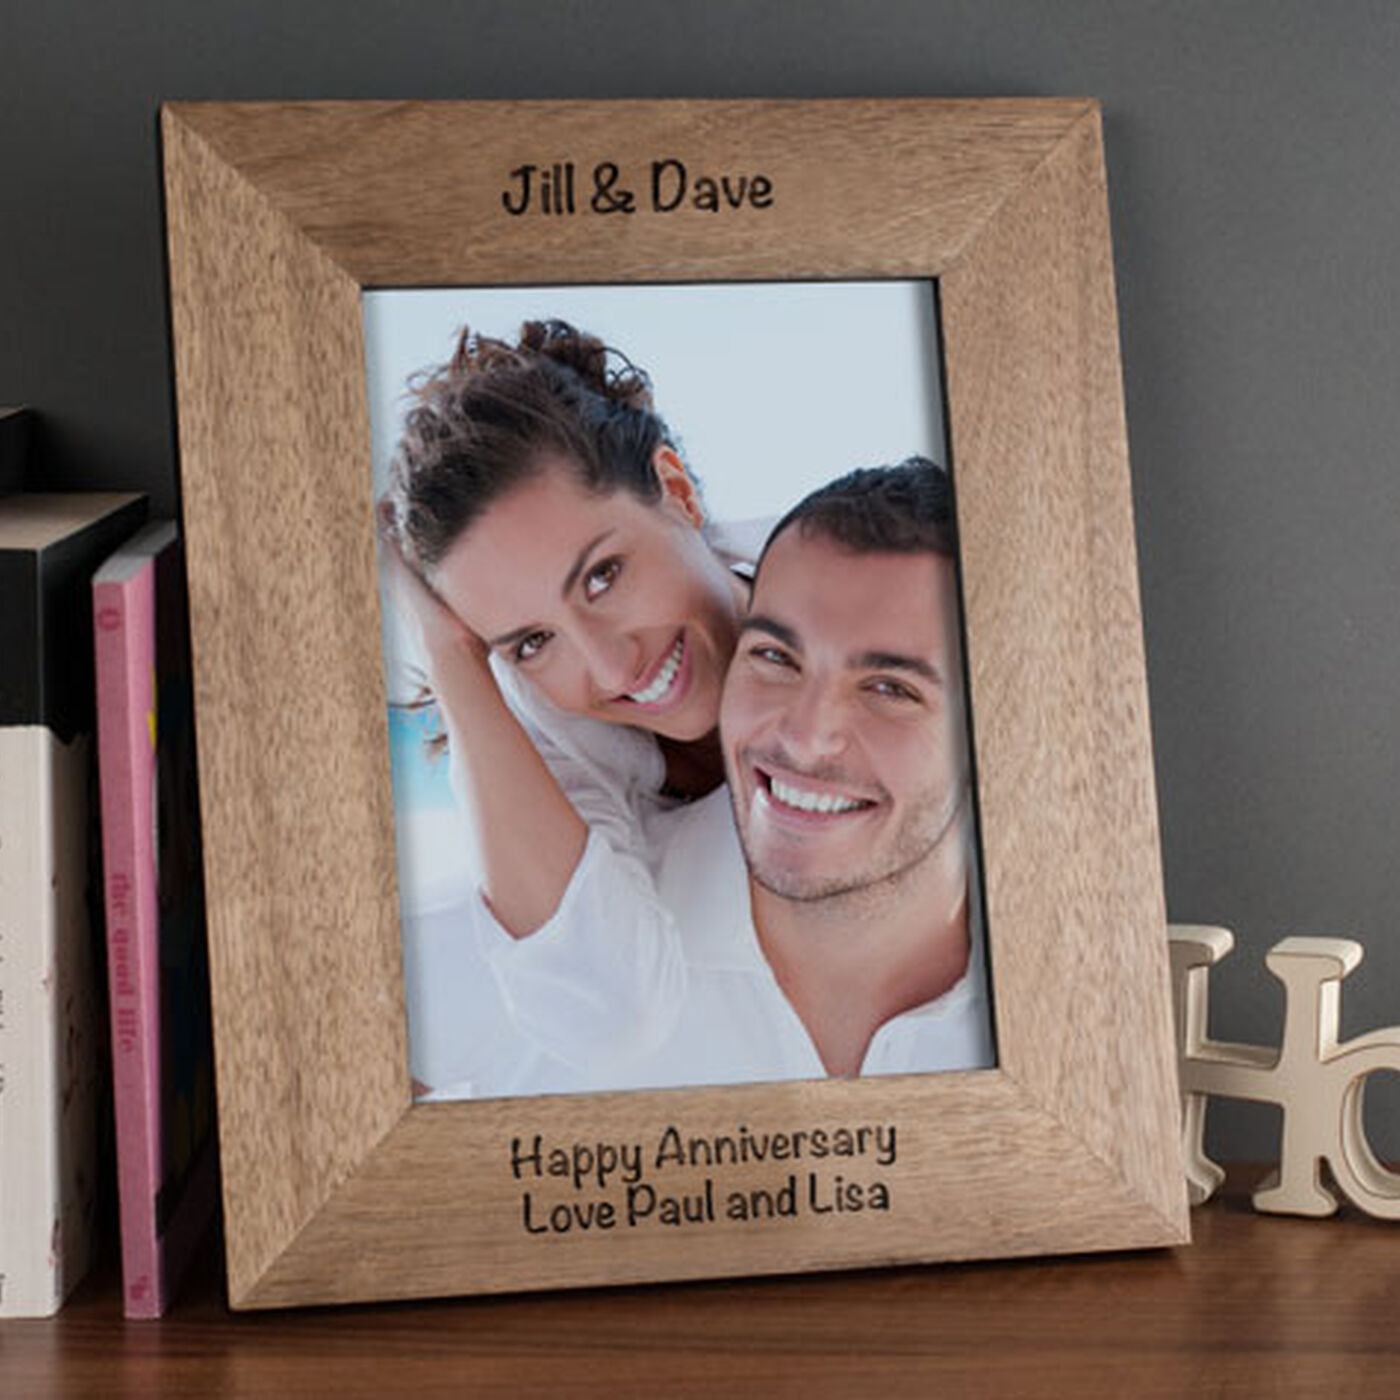 Engraved Wooden Photo Frame - Happy Valentine's Day